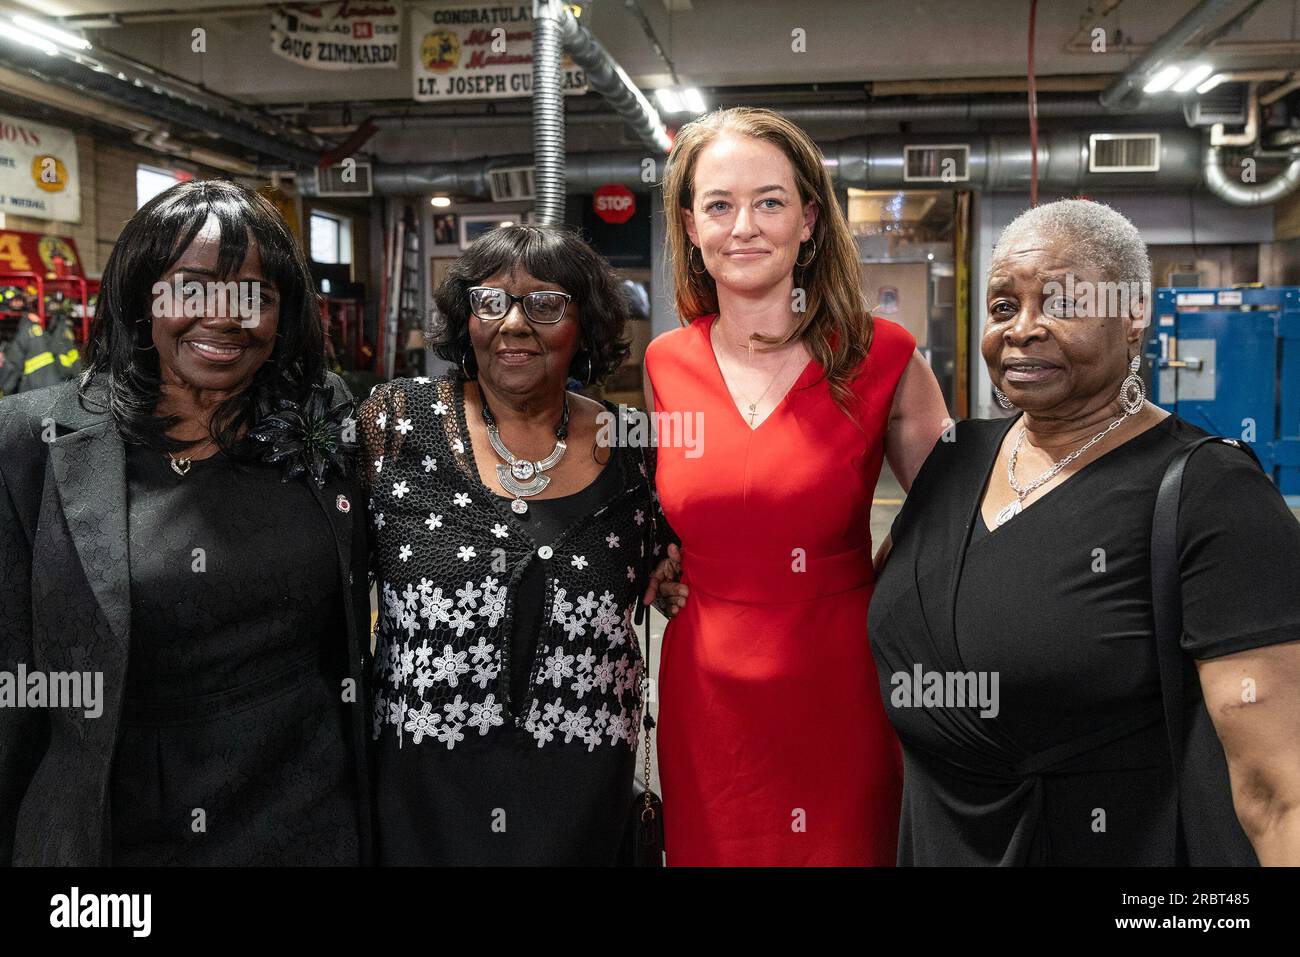 New York, USA. 10th July, 2023. Gwendolyn Webb, Gwendolyn Gamble, Laura Kavanagh, Gloria Washington attend a press conference on anniversary of Children's Crusade or Children's March as it is known at FDNY Engine 1, Ladder 24 station in New York. March was held in Birmingham, Alabama on 2 - 10 May, 1963 and was attended by more than 5,000 school children, 3 of them joined this press conference: Gloria Washington, Gwendolyn Gamble, Gwyndolyn Webb. Members of FDNY at the time stood up against the City of Birmingham fire department using force against children. (Photo by Lev Radin/Pacific Press)  Stock Photo